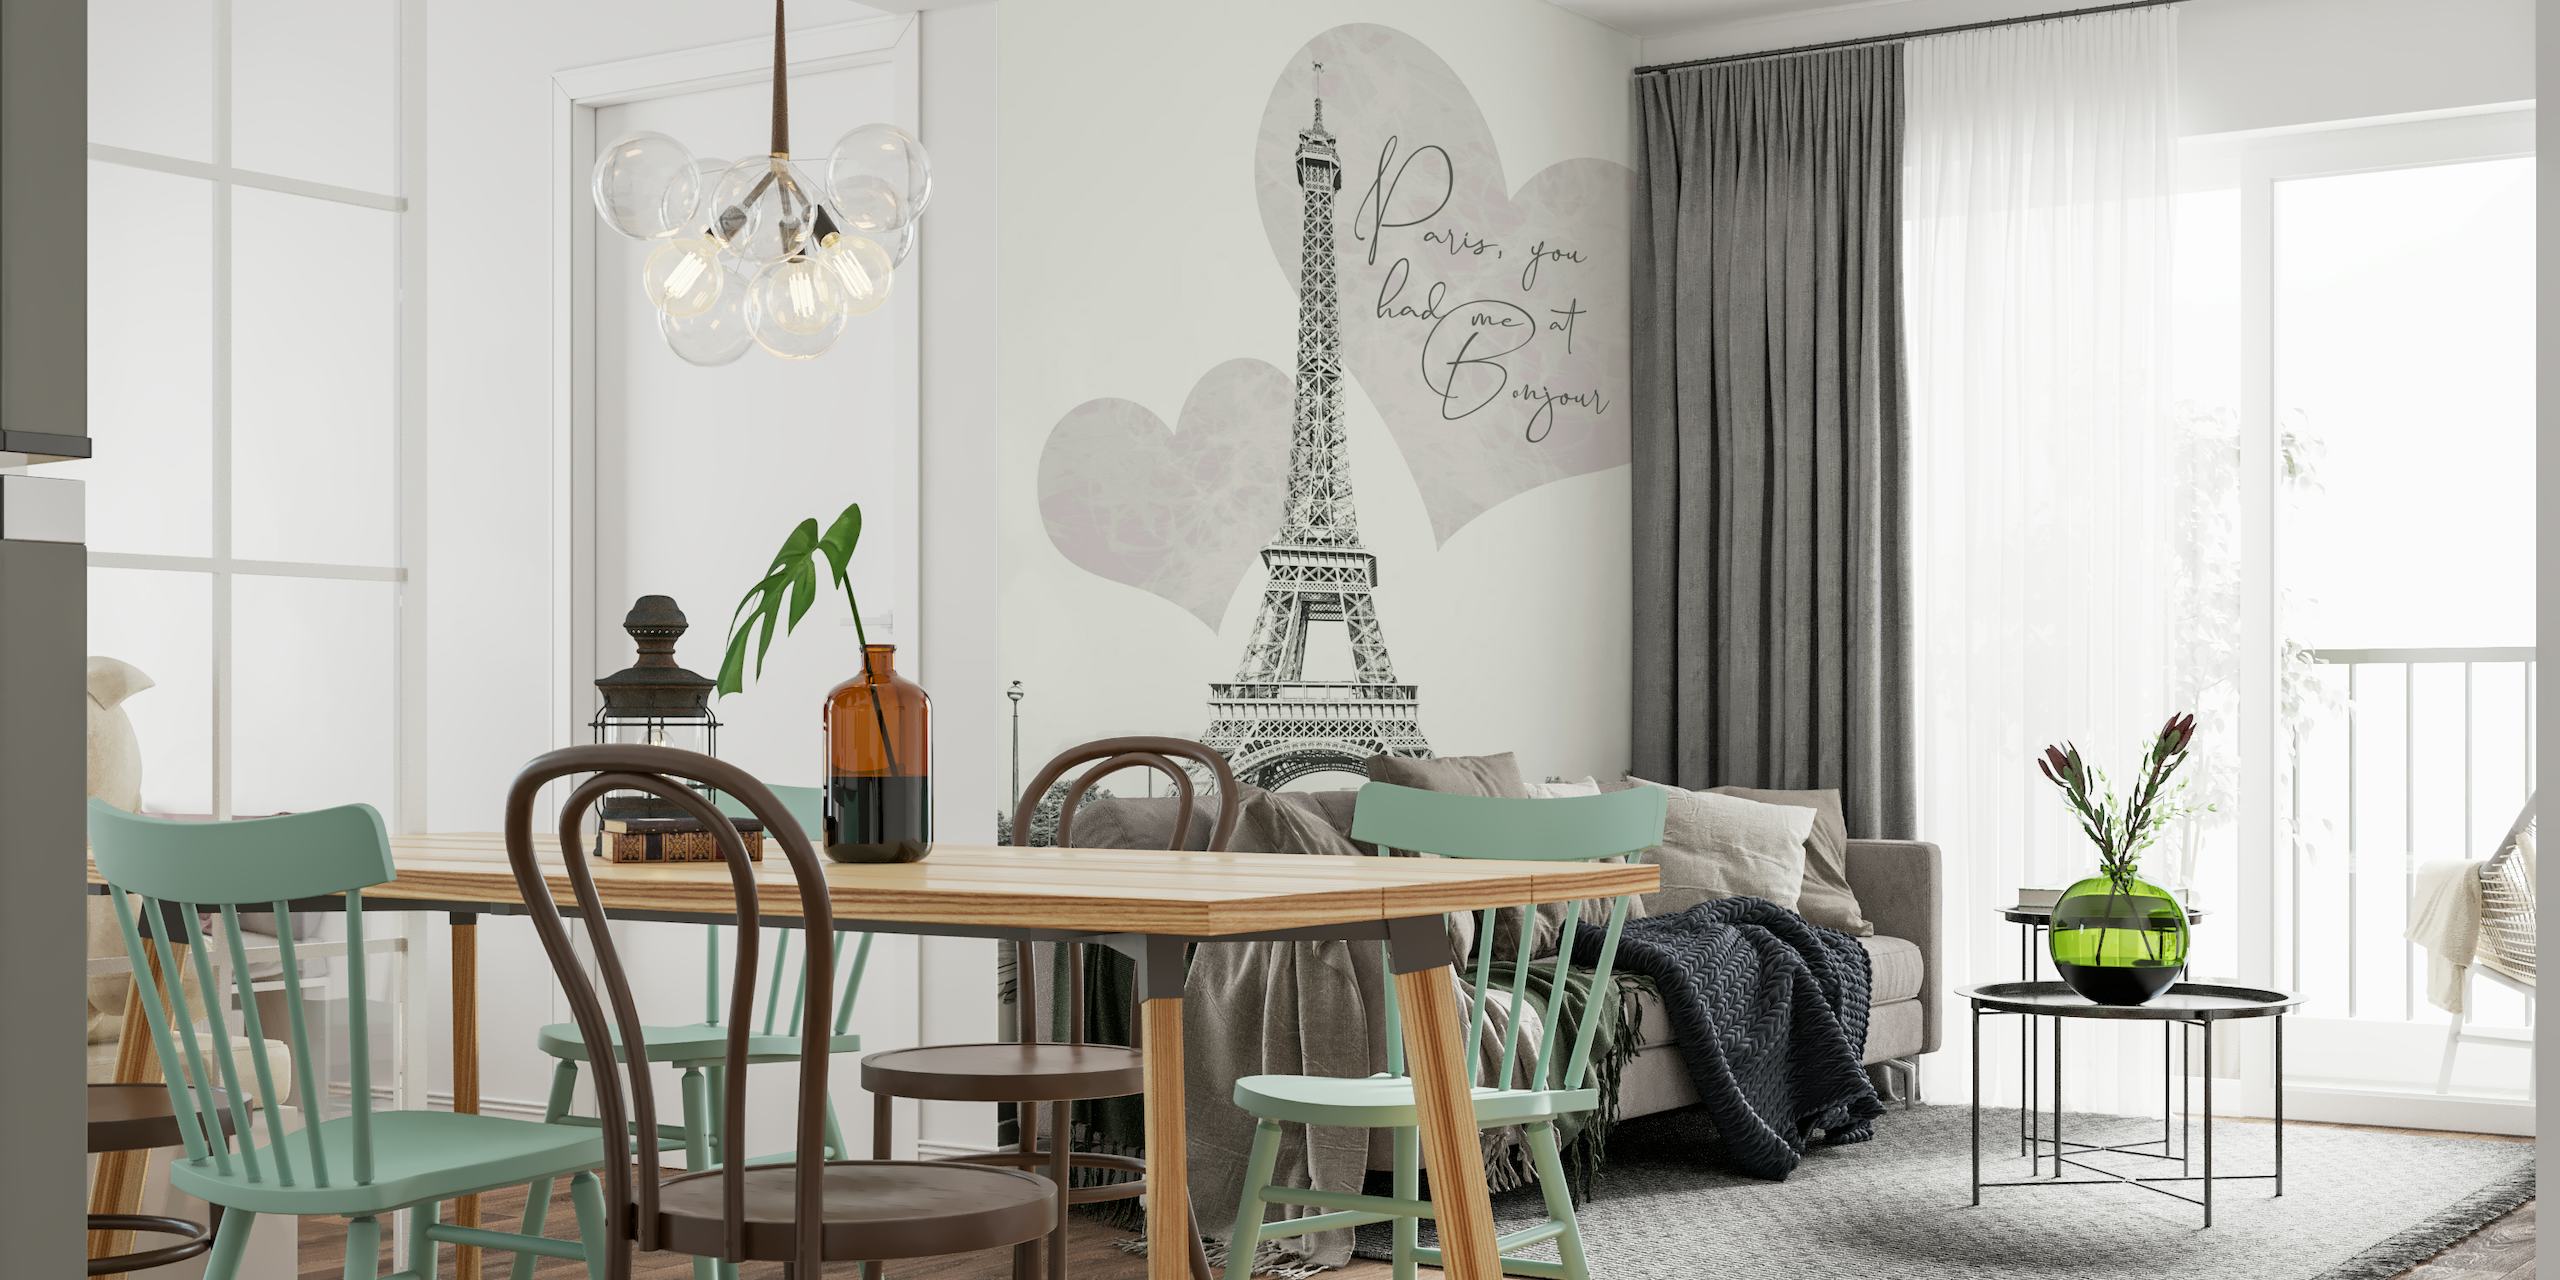 Eiffel Tower with romantic heart shapes and 'Paris, you had me at BONJOUR' quote mural